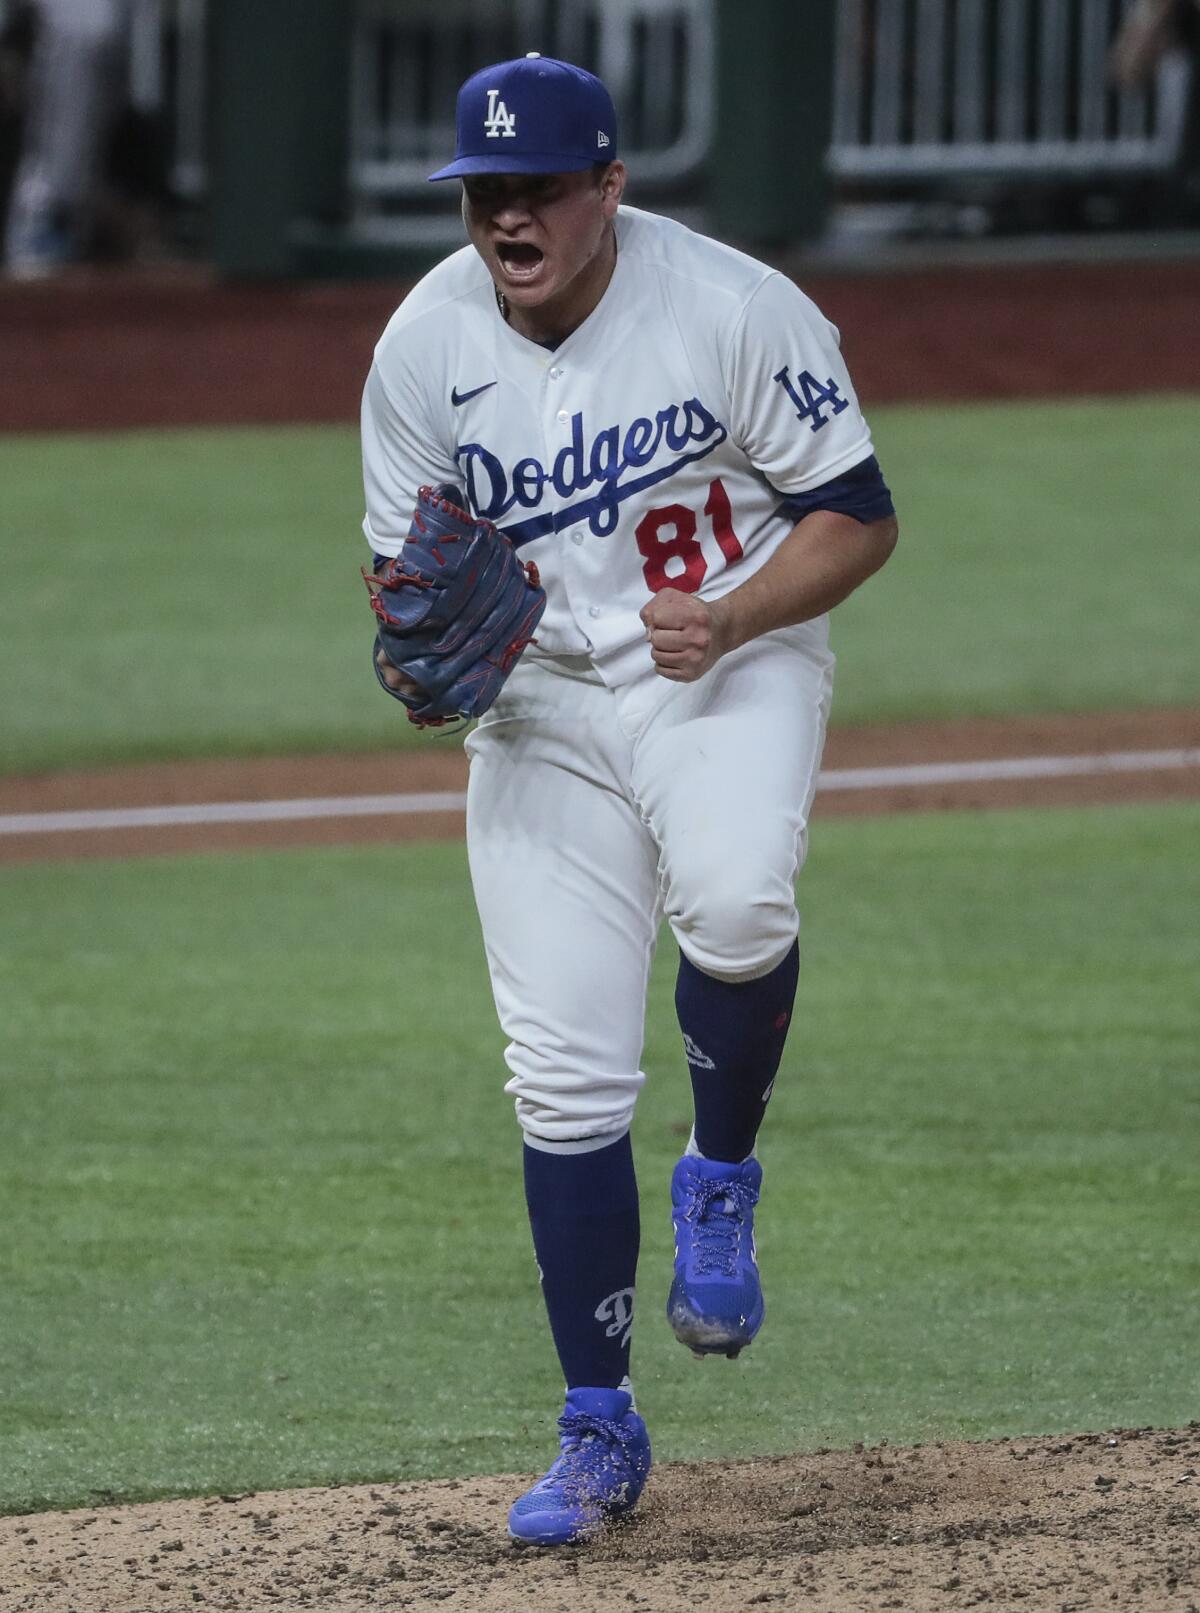 Slimmed down Victor González aims to improve for Dodgers - Los